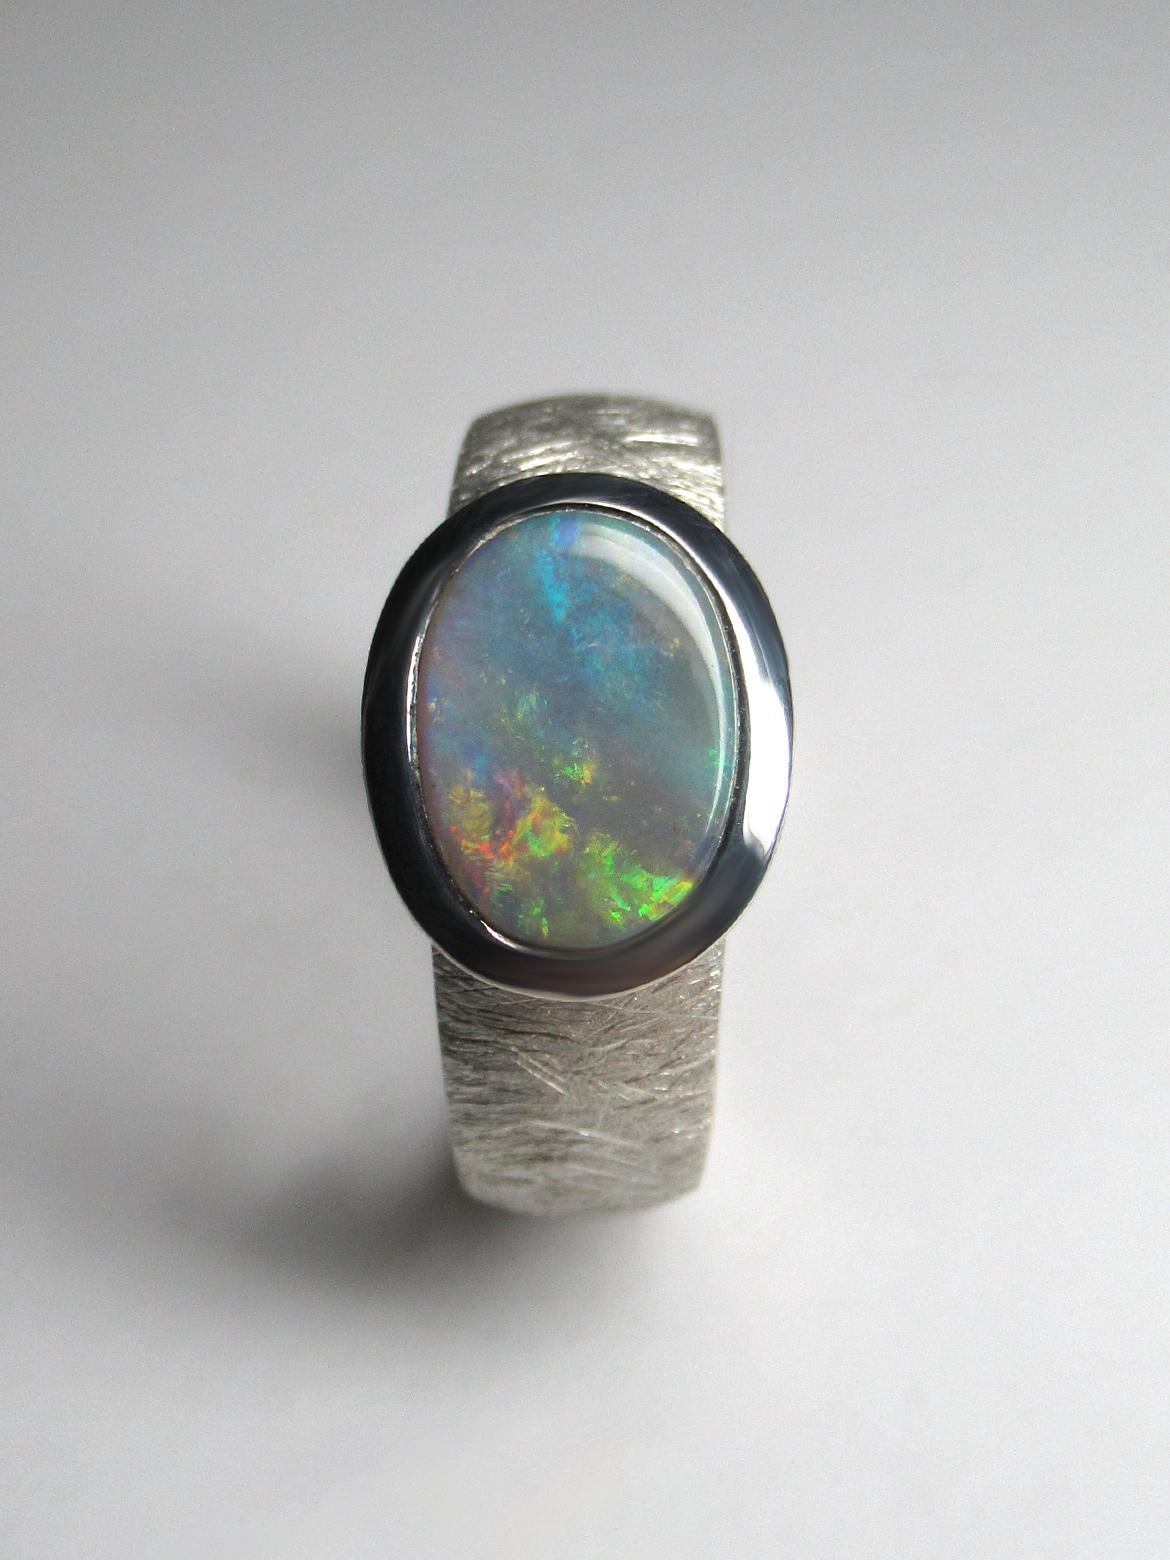 Silver ring with natural precious Opal
Opal origin - Australia
gemstone measurements 0.28 х 0.39 in / 7 х 10 mm
ring weight - 7.4 grams
ring size - 8 US
ref No 2447

Worldwide shipping from Berlin, Germany. Prices include all taxes, valid in Germany